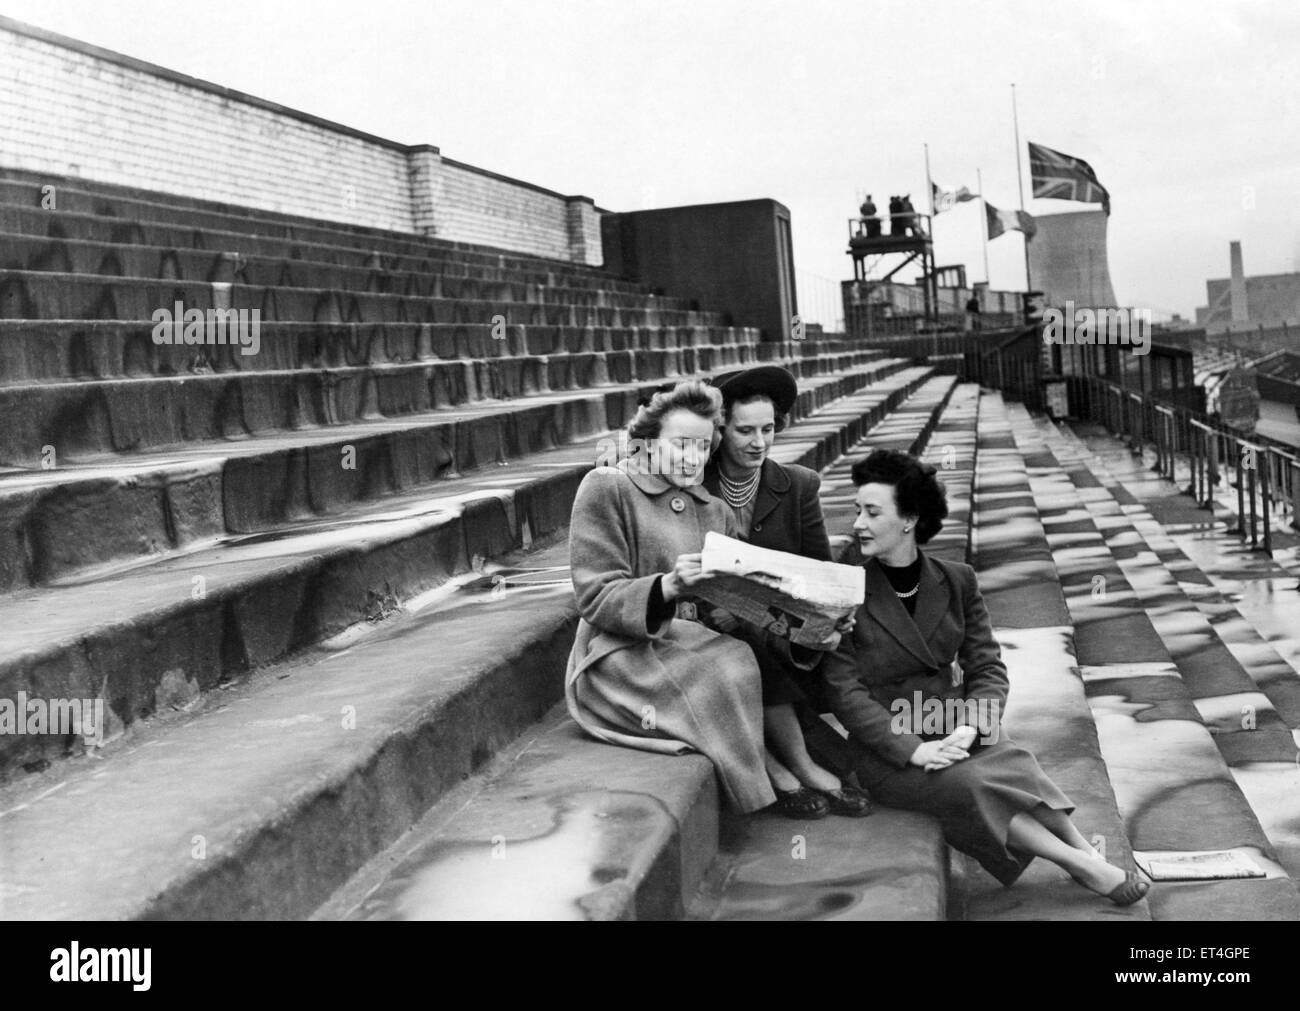 Three women checking the form in a newspaper at the Grand National race, Aintree Racecourse, Liverpool, Merseyside. 28th March 1953. Stock Photo